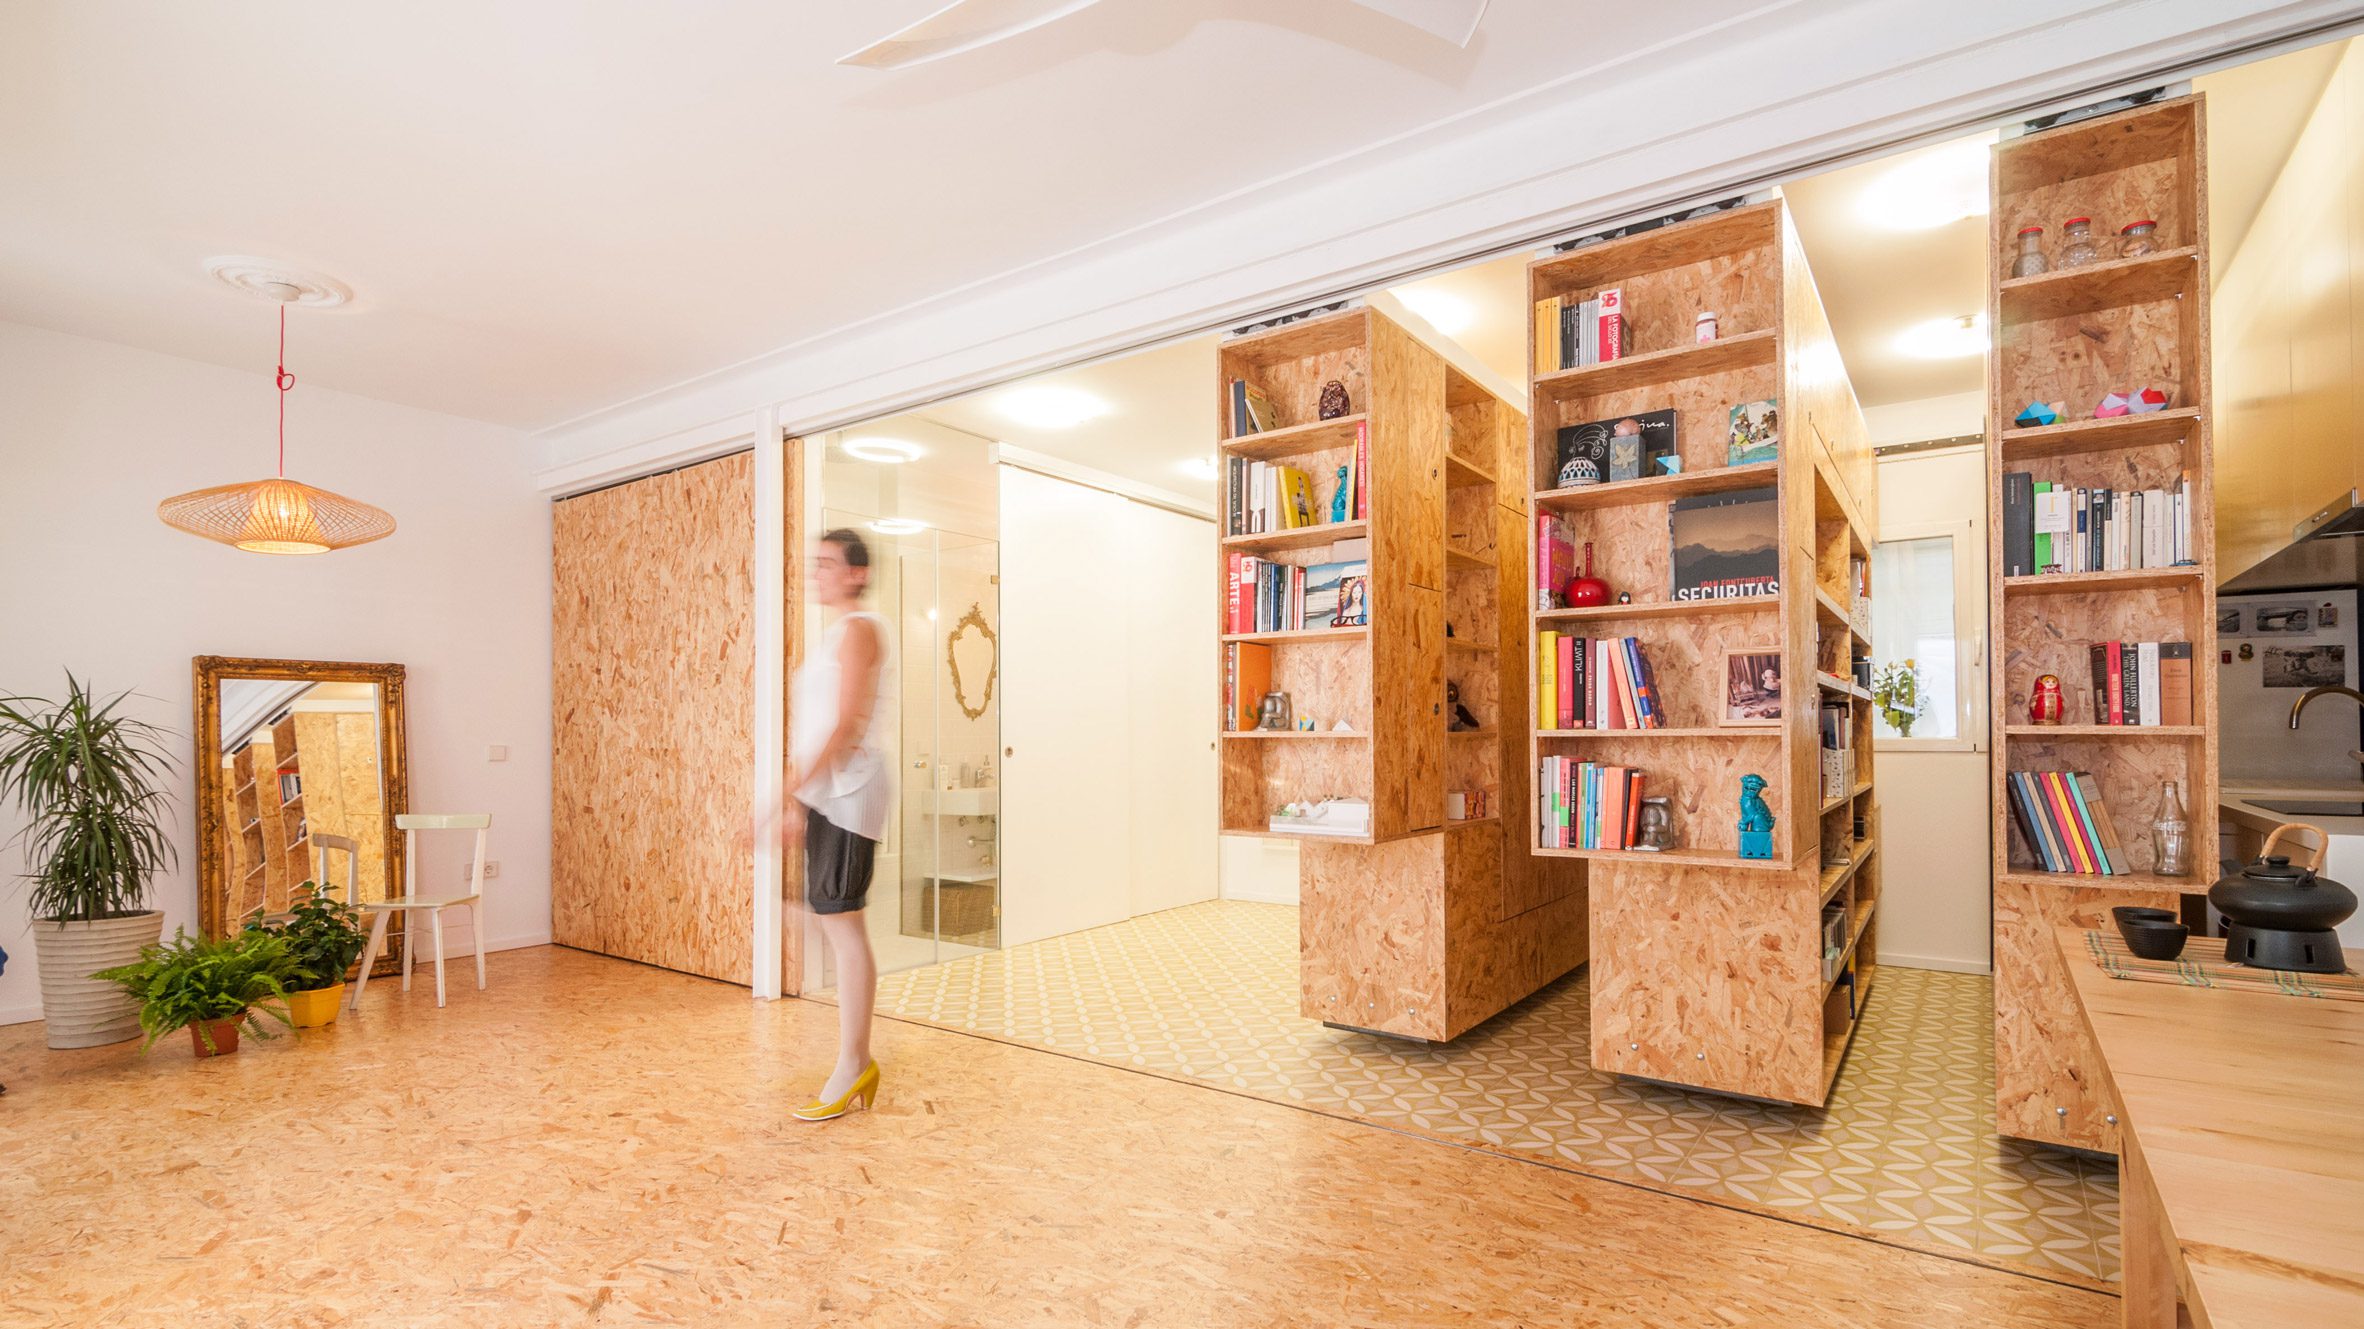 Architects create Cubitat that turns any space into an apartment